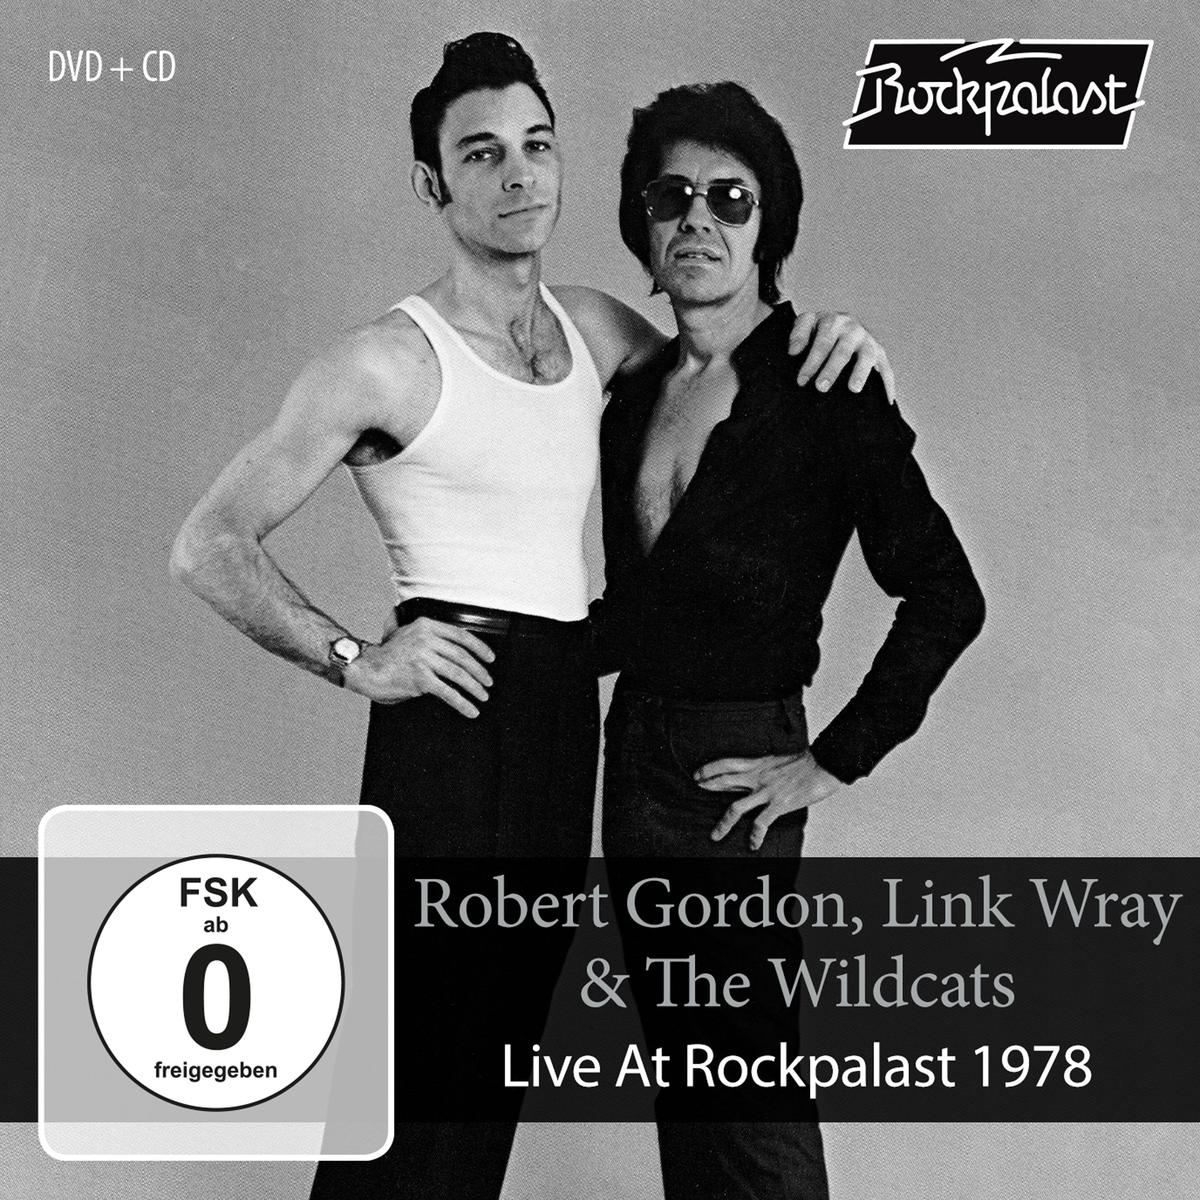 ROBERT GORDON, LINK WRAY & THE WILD CATS / LIVE AT ROCKPALAST 1978 (CD+DVD)